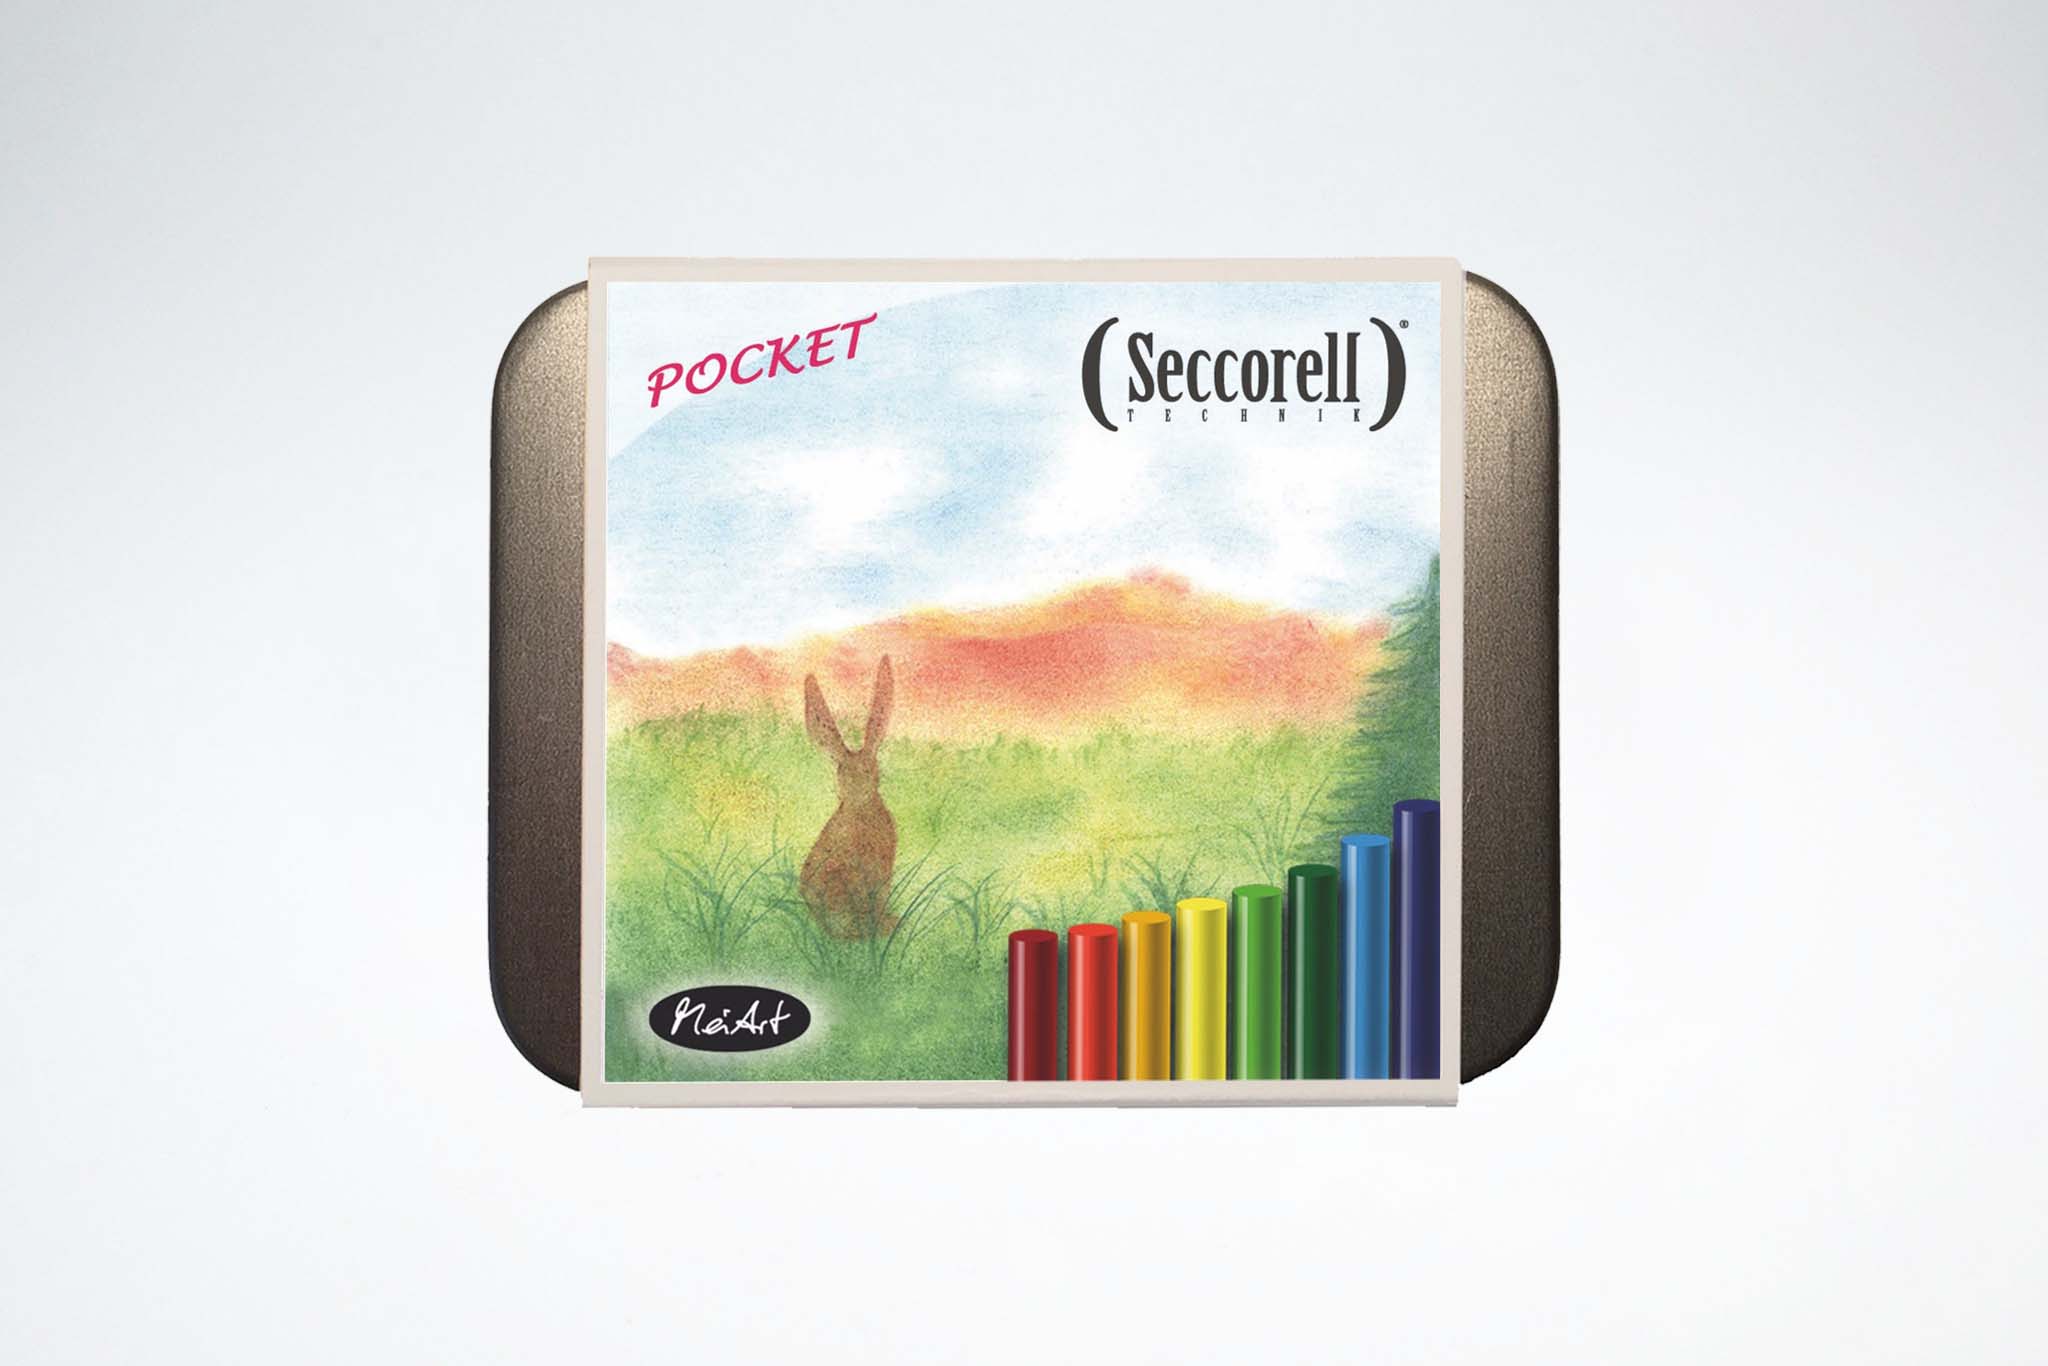 Seccorell-Pocket-Hase-1_1024x1024@2x